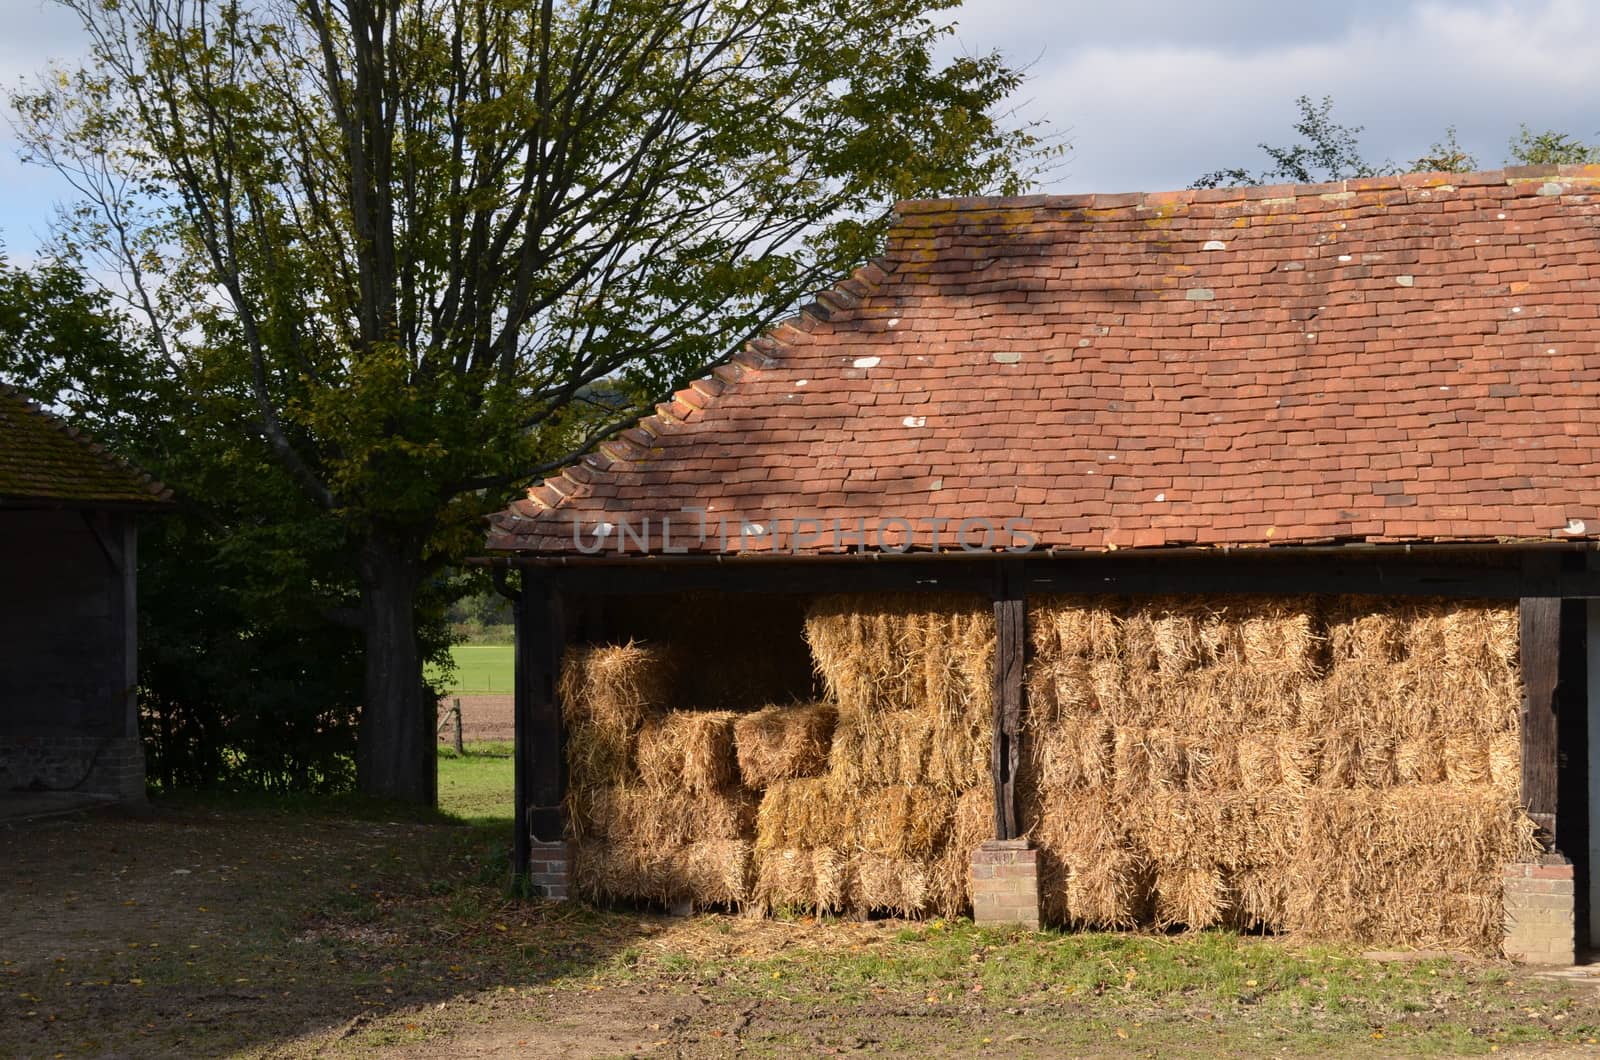 English hay barn. by bunsview